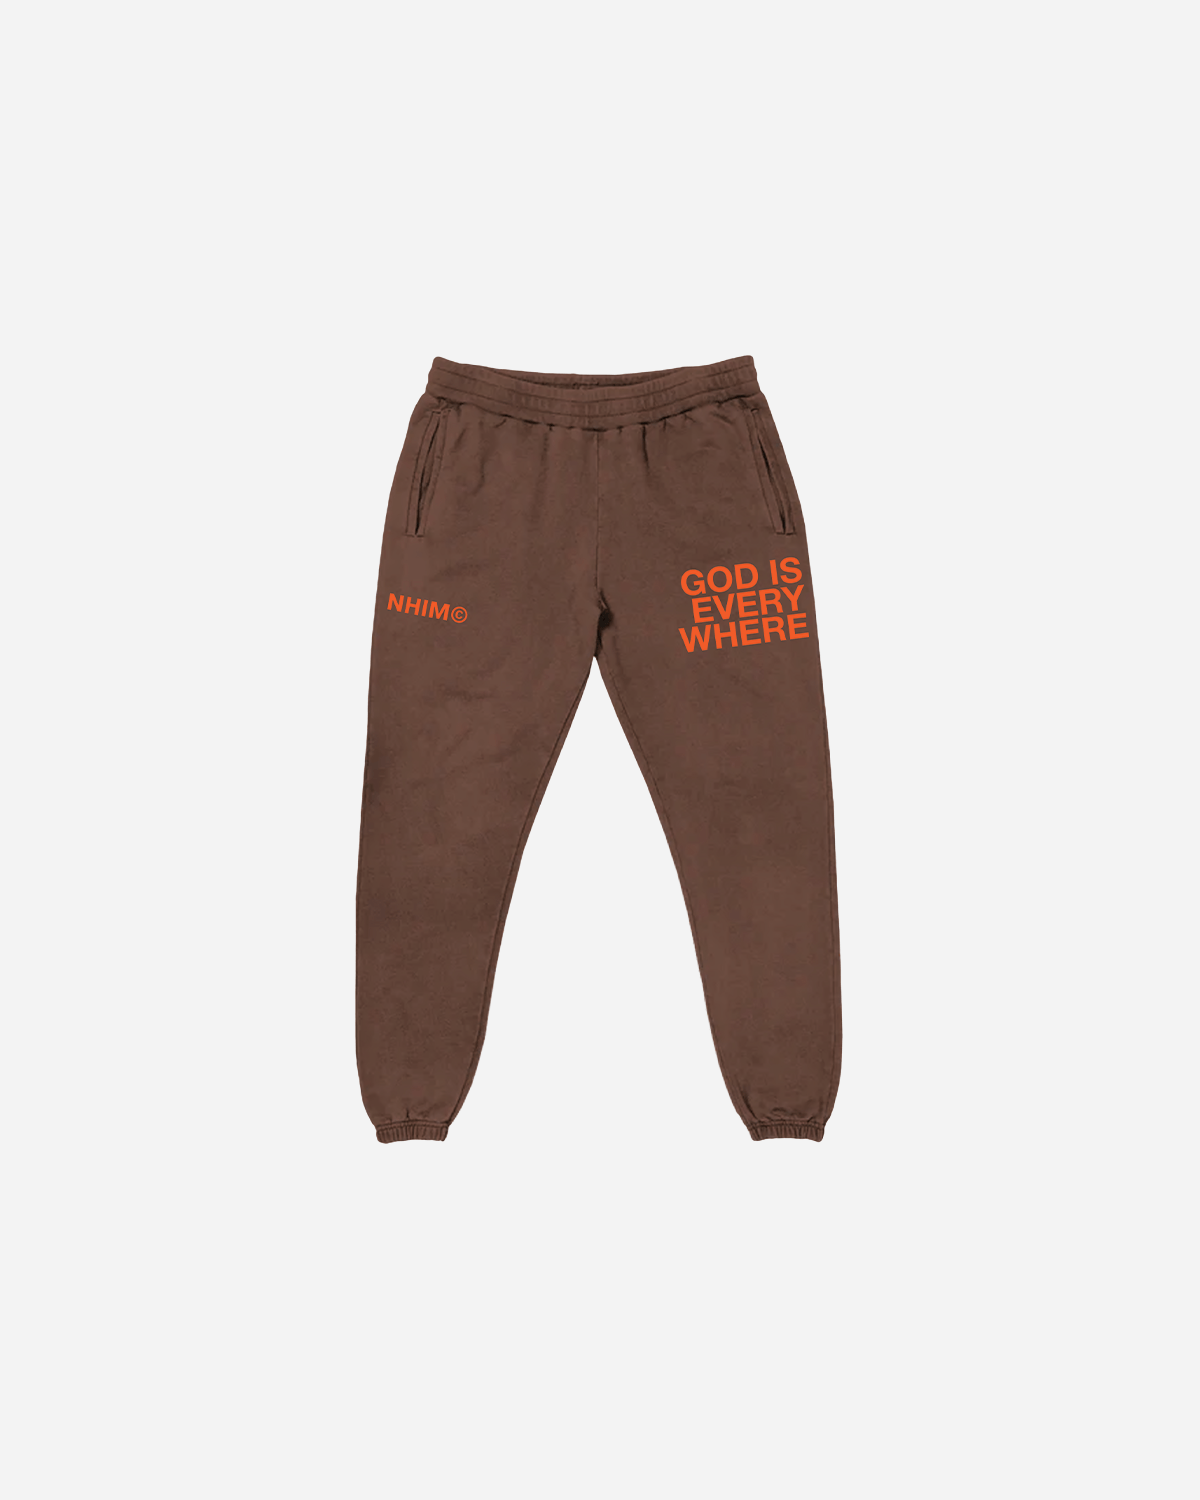 GOD IS EVERYWHERE brown premium sweatpants by NHIM APPAREL Christian clothing brand